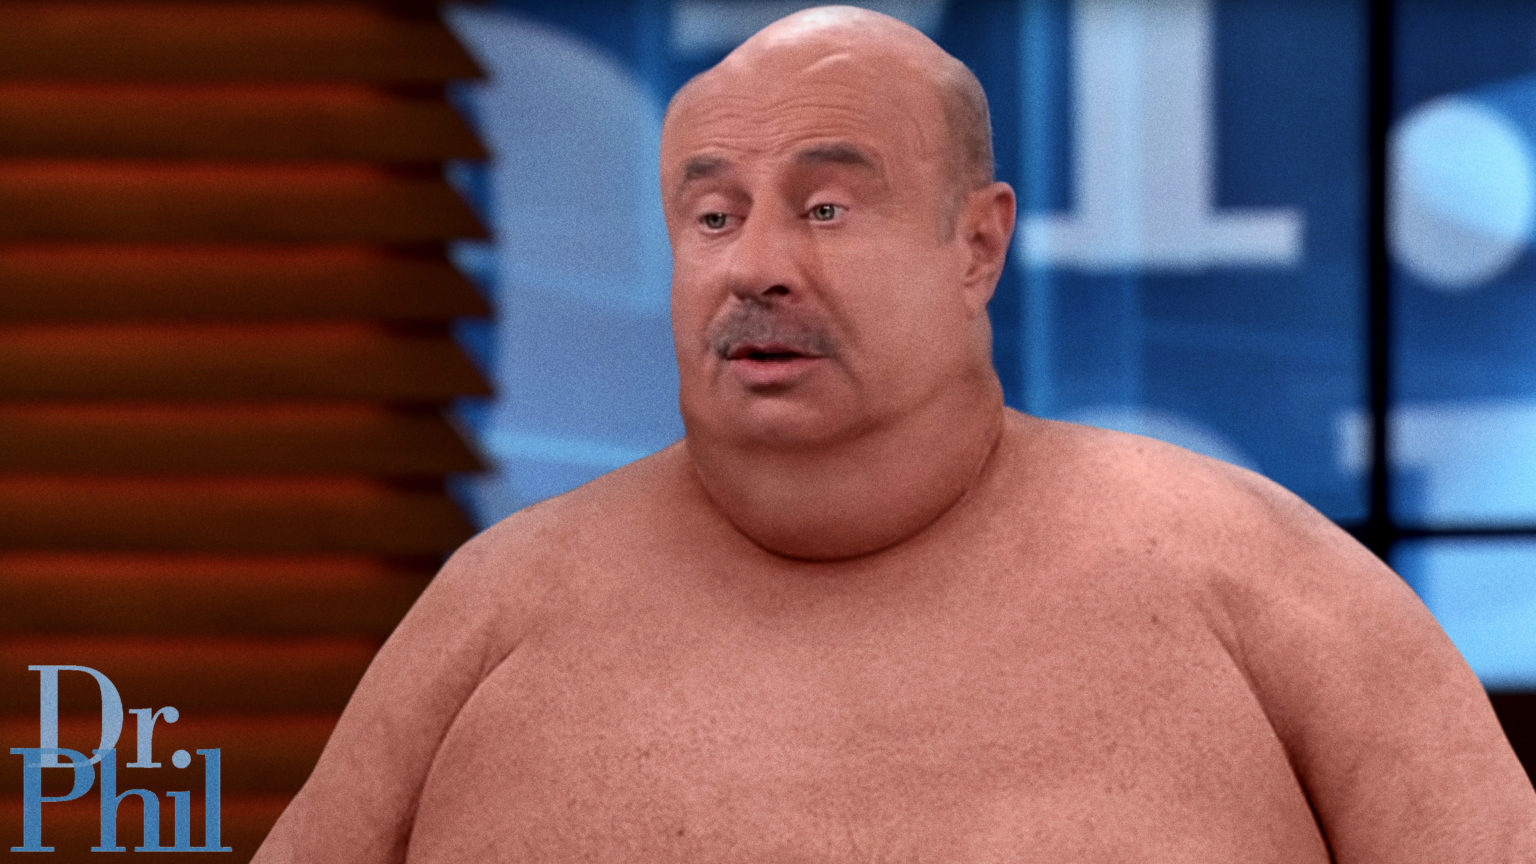 What Was He Going For? Dr. Phil Wore A Fat Suit On Yesterday’s Episode